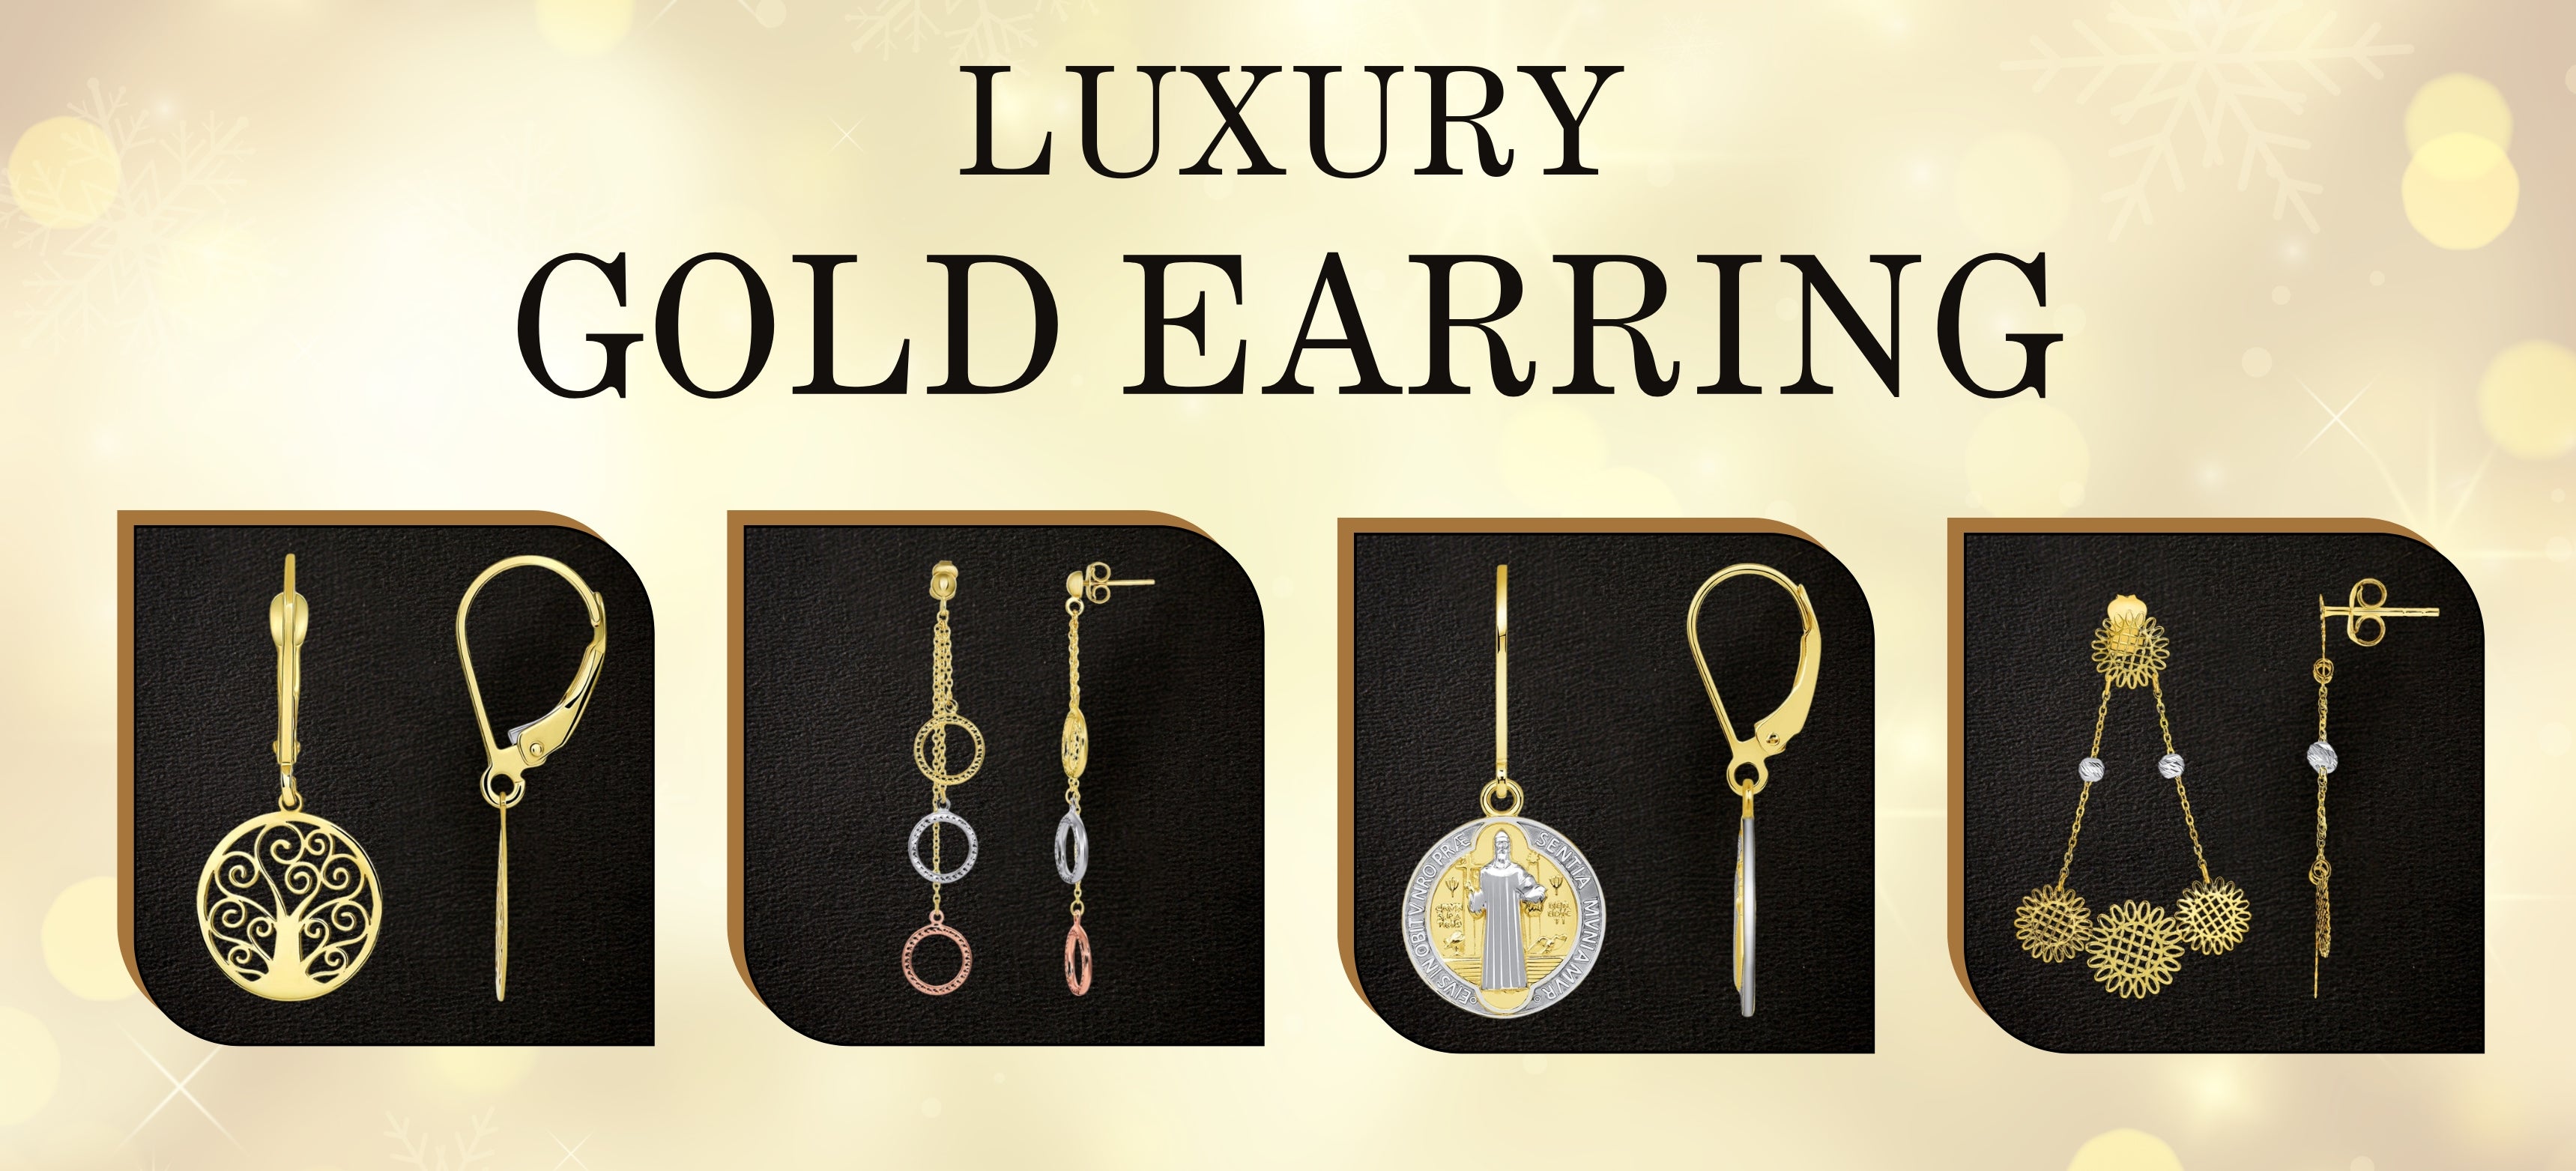 Top 10 Gold Earring Combinations for a Stylish Look